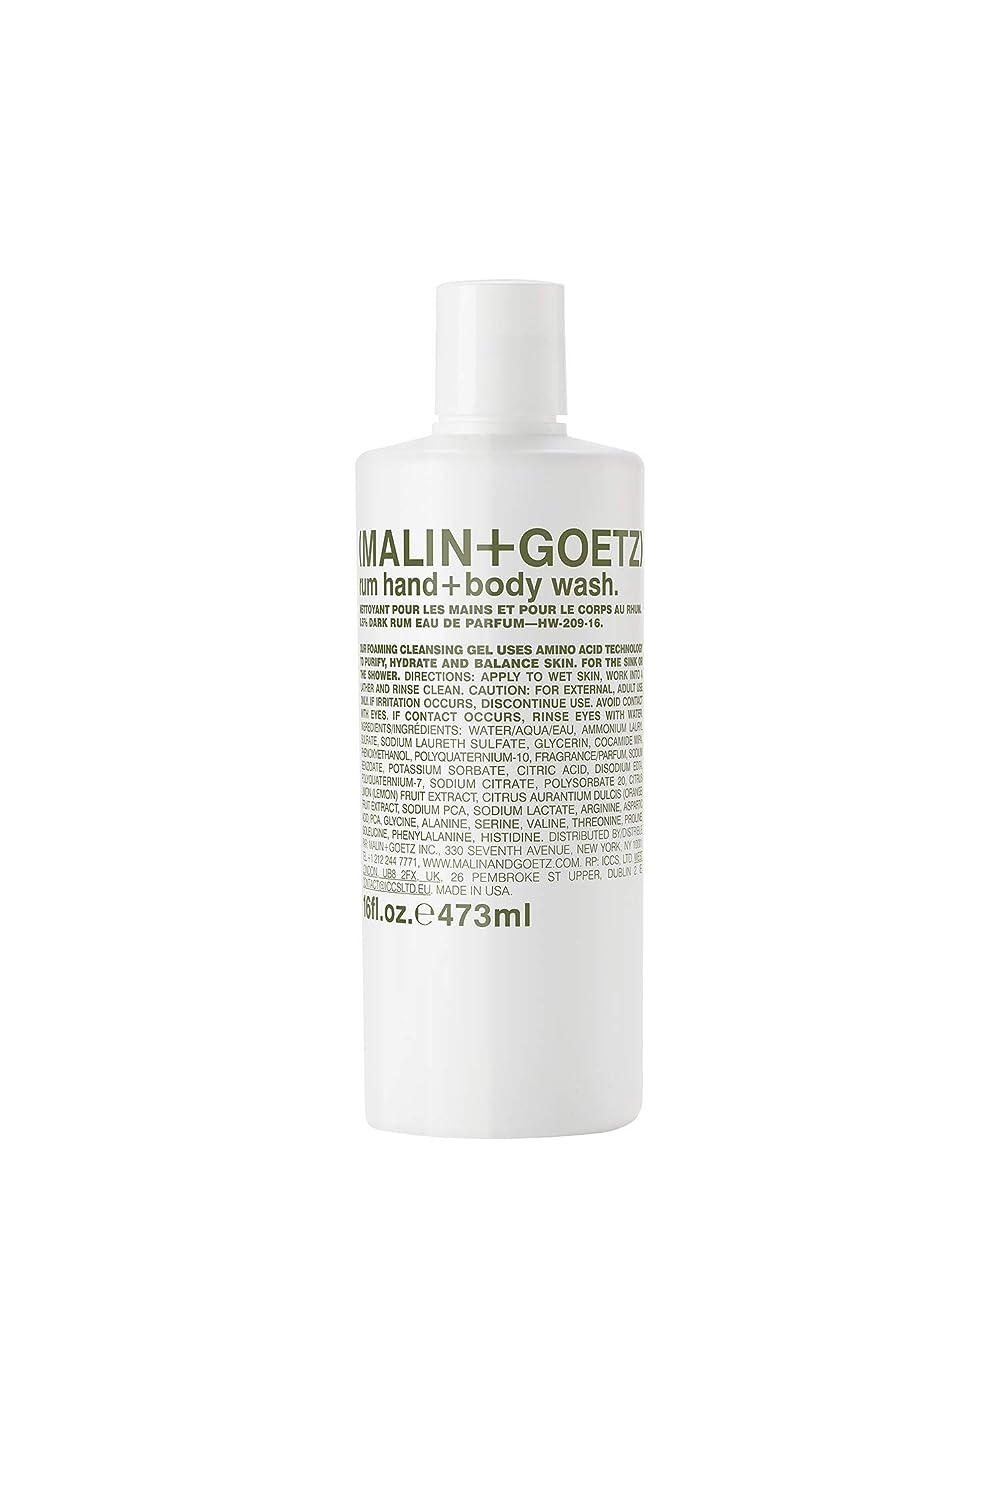 Malin + Goetz Rum Hand + Body Wash, soothing hydrating body soap for men and women, prevents dry skin, no stripping or